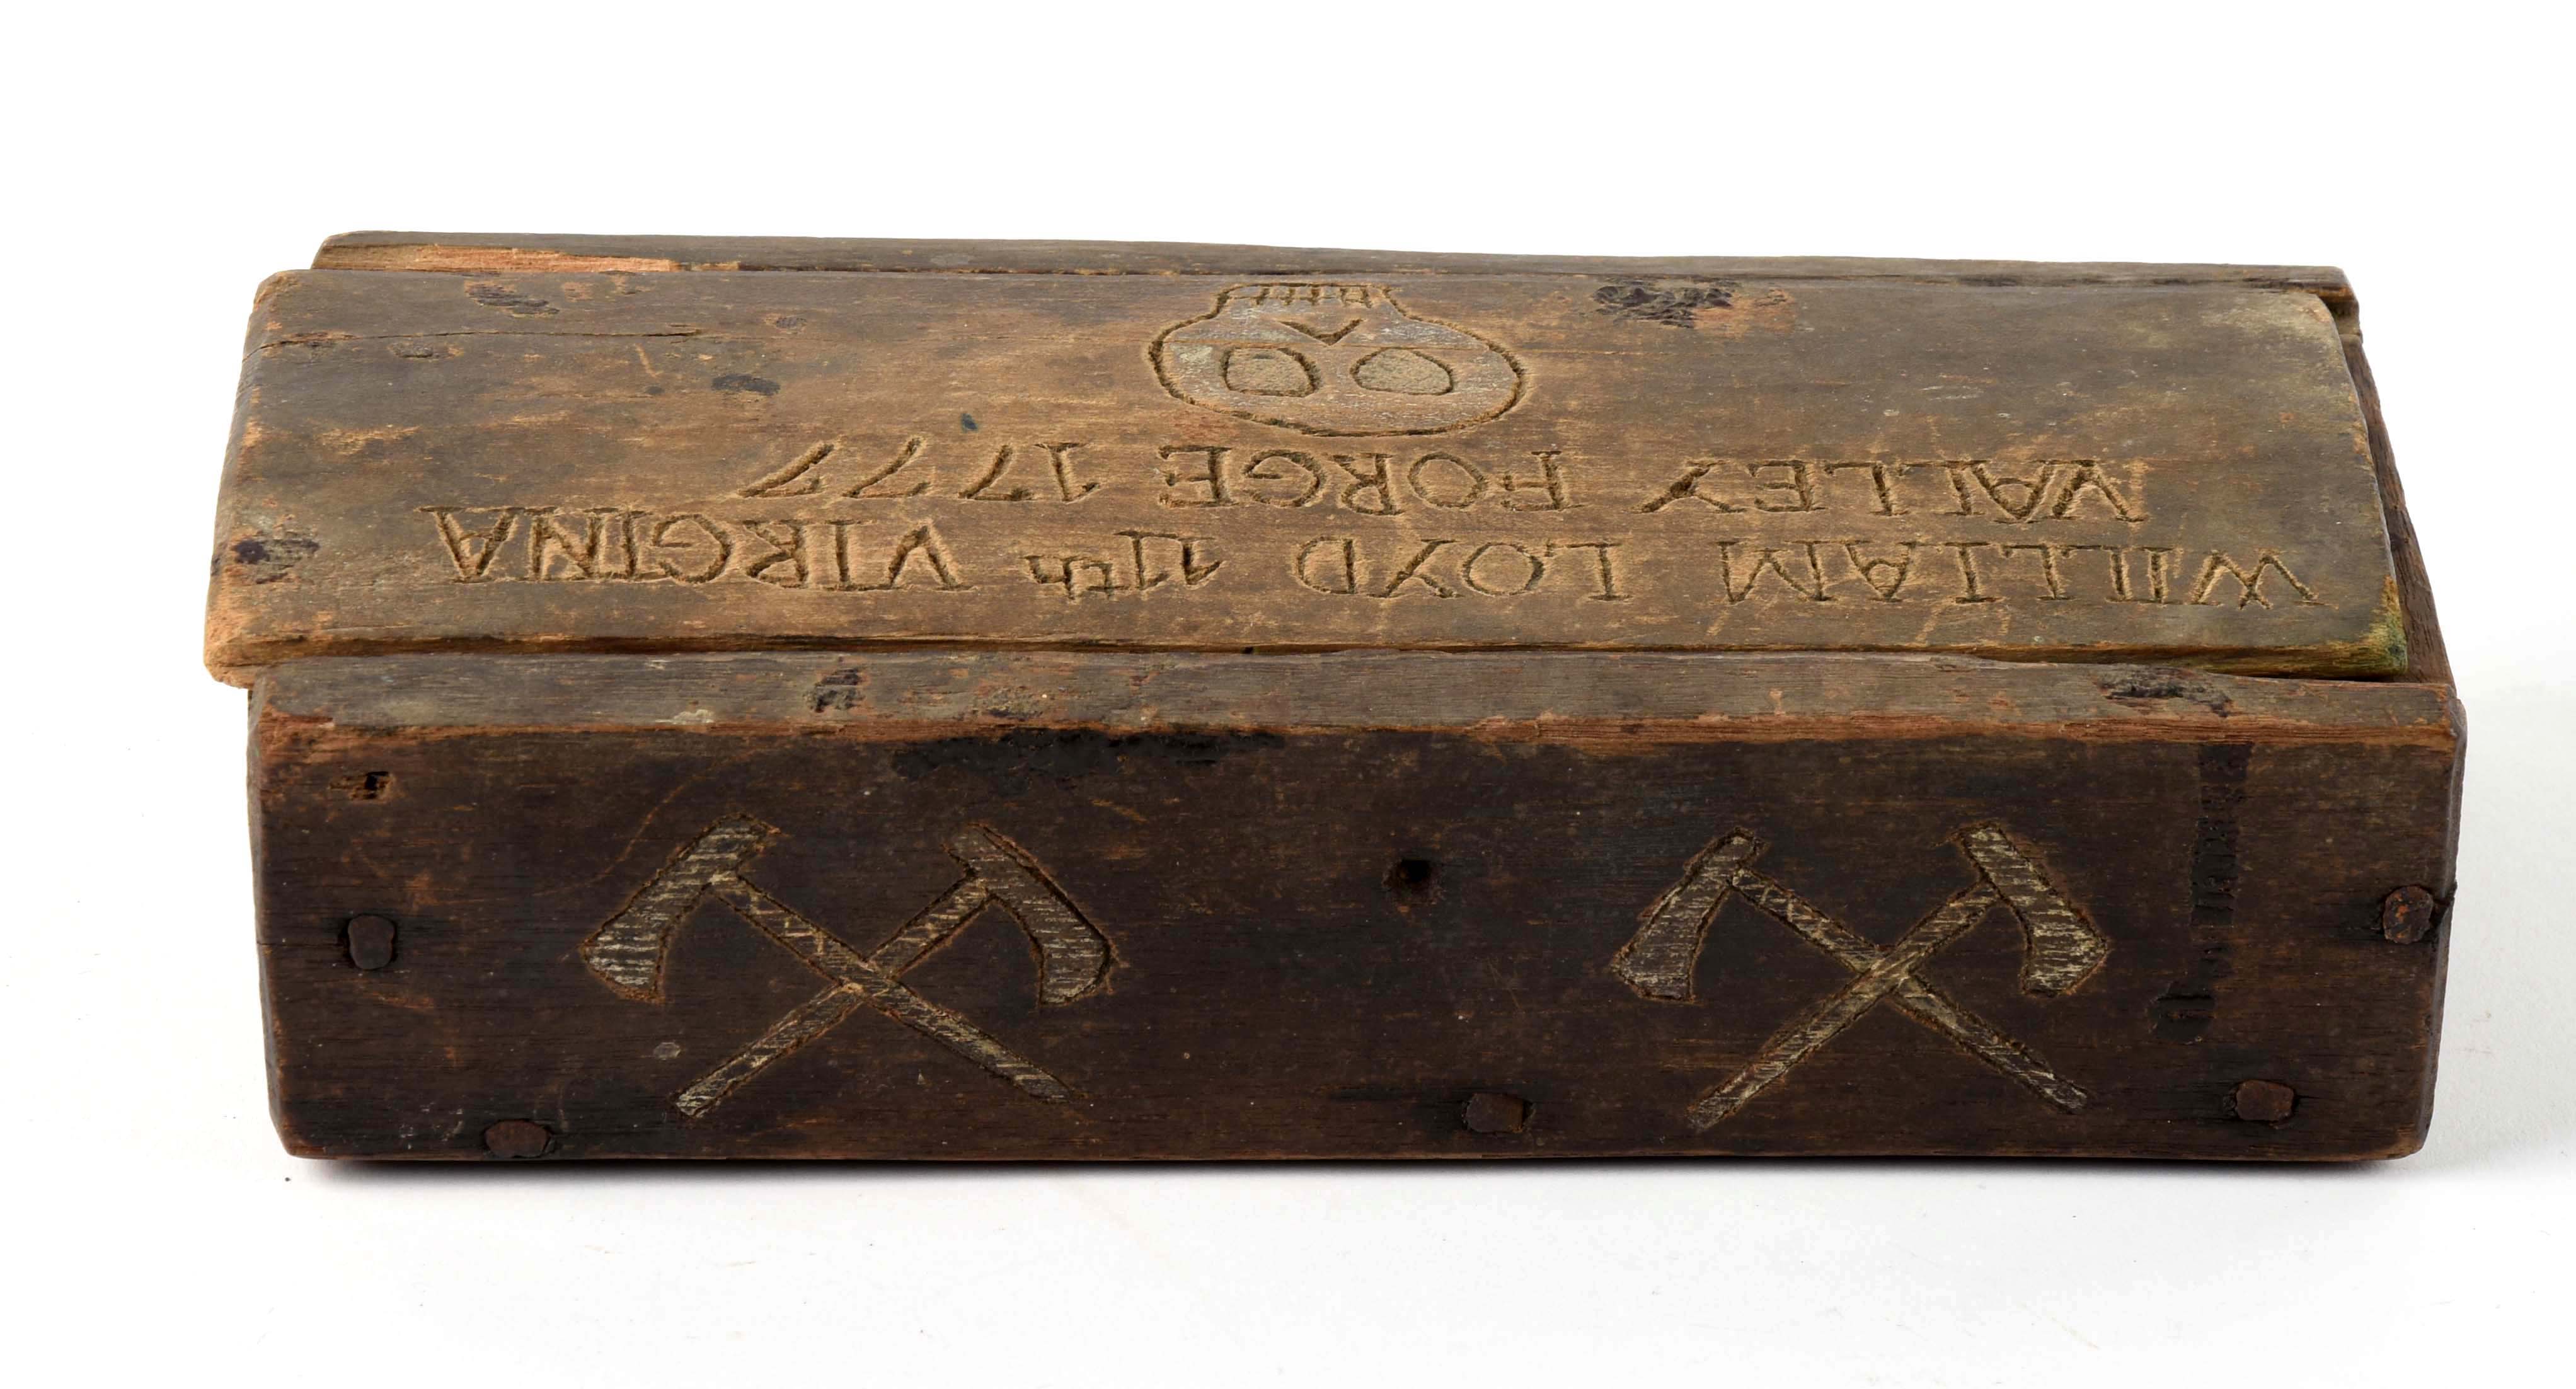 1777 Valley Forge Soldier Slide Lid Box Identified to William Lloyd 11th Virginia Regiment. - Image 2 of 3